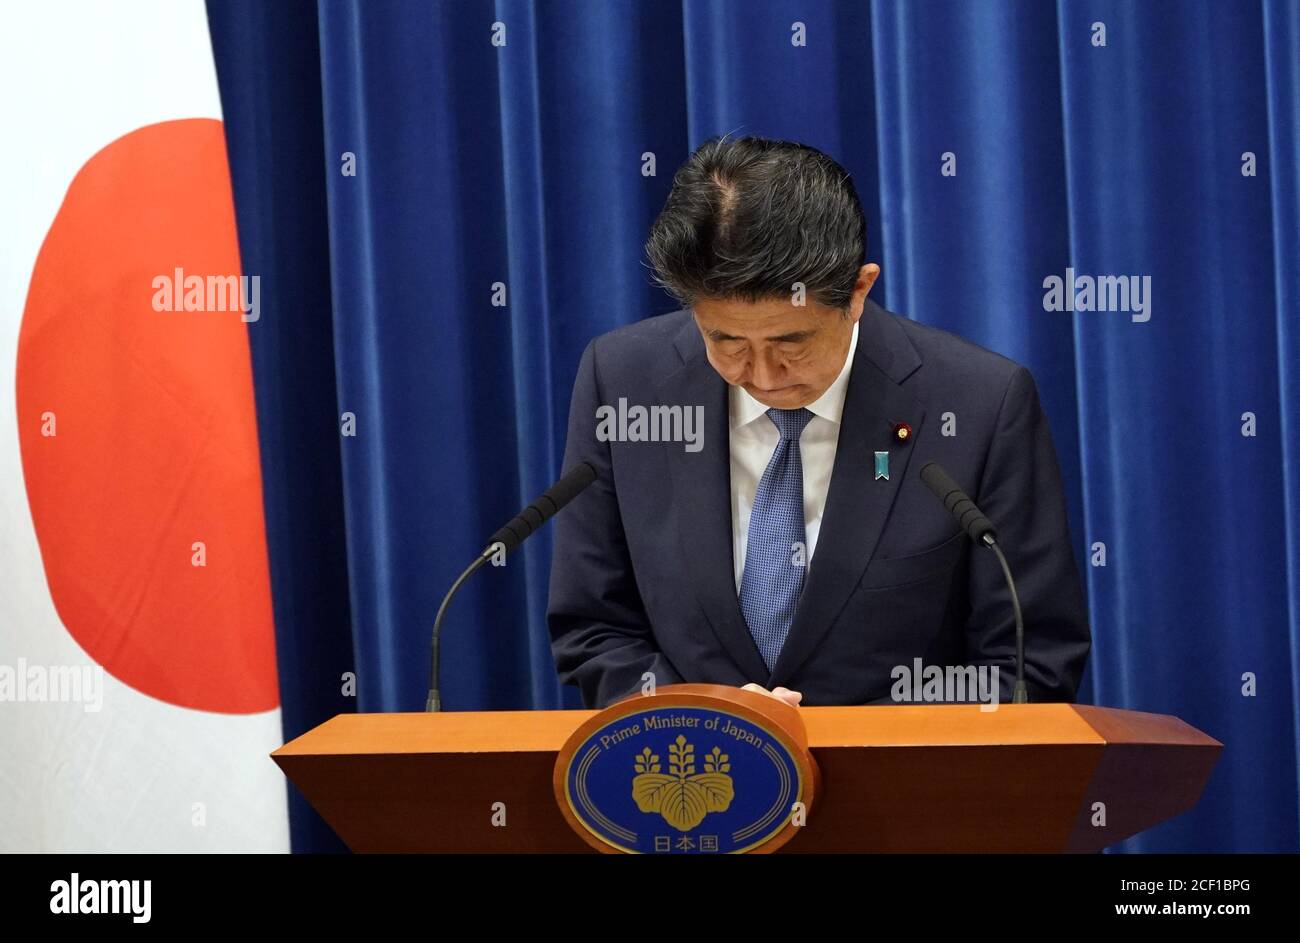 (200903) -- BEIJING, Sept. 3, 2020 (Xinhua) -- Japanese Prime Minister Shinzo Abe reacts during a press conference announcing that he will step down from his post due to health concerns in Tokyo, Japan, Aug. 28, 2020. (Franck Robichon/Pool via Xinhua) Stock Photo